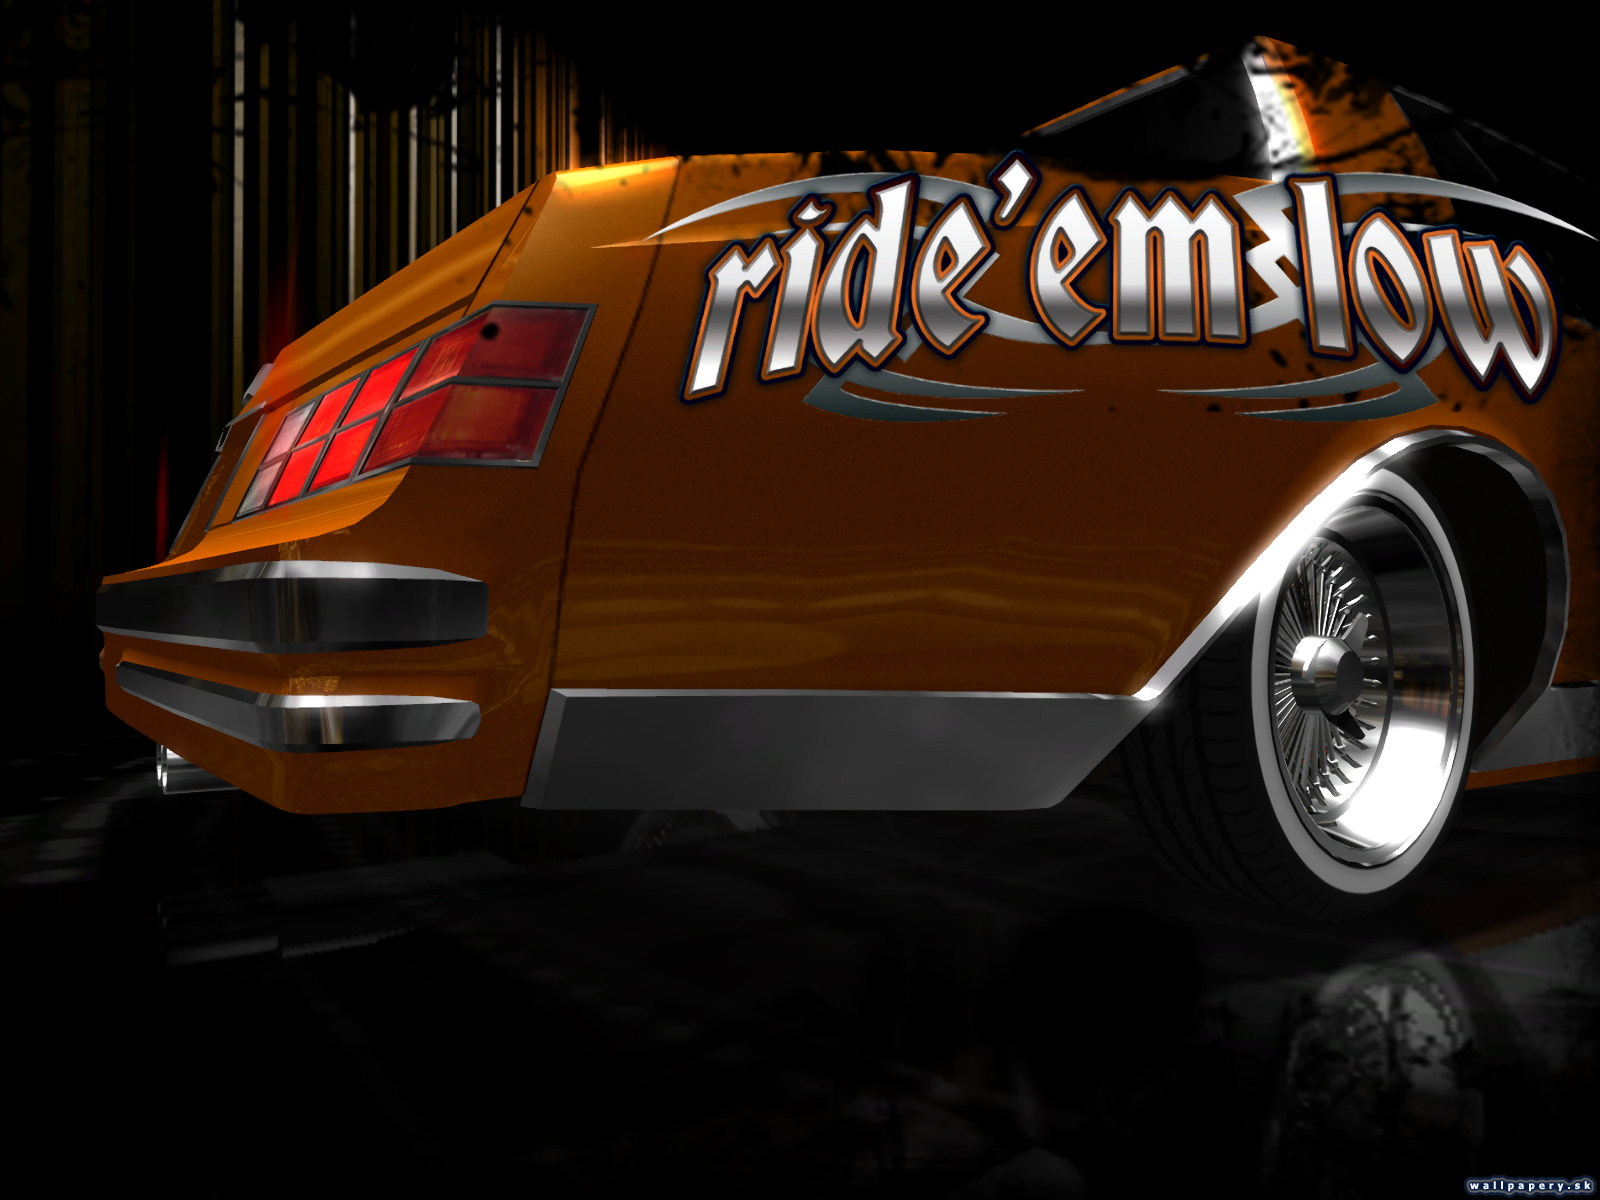 LowRider Extreme - wallpaper 2